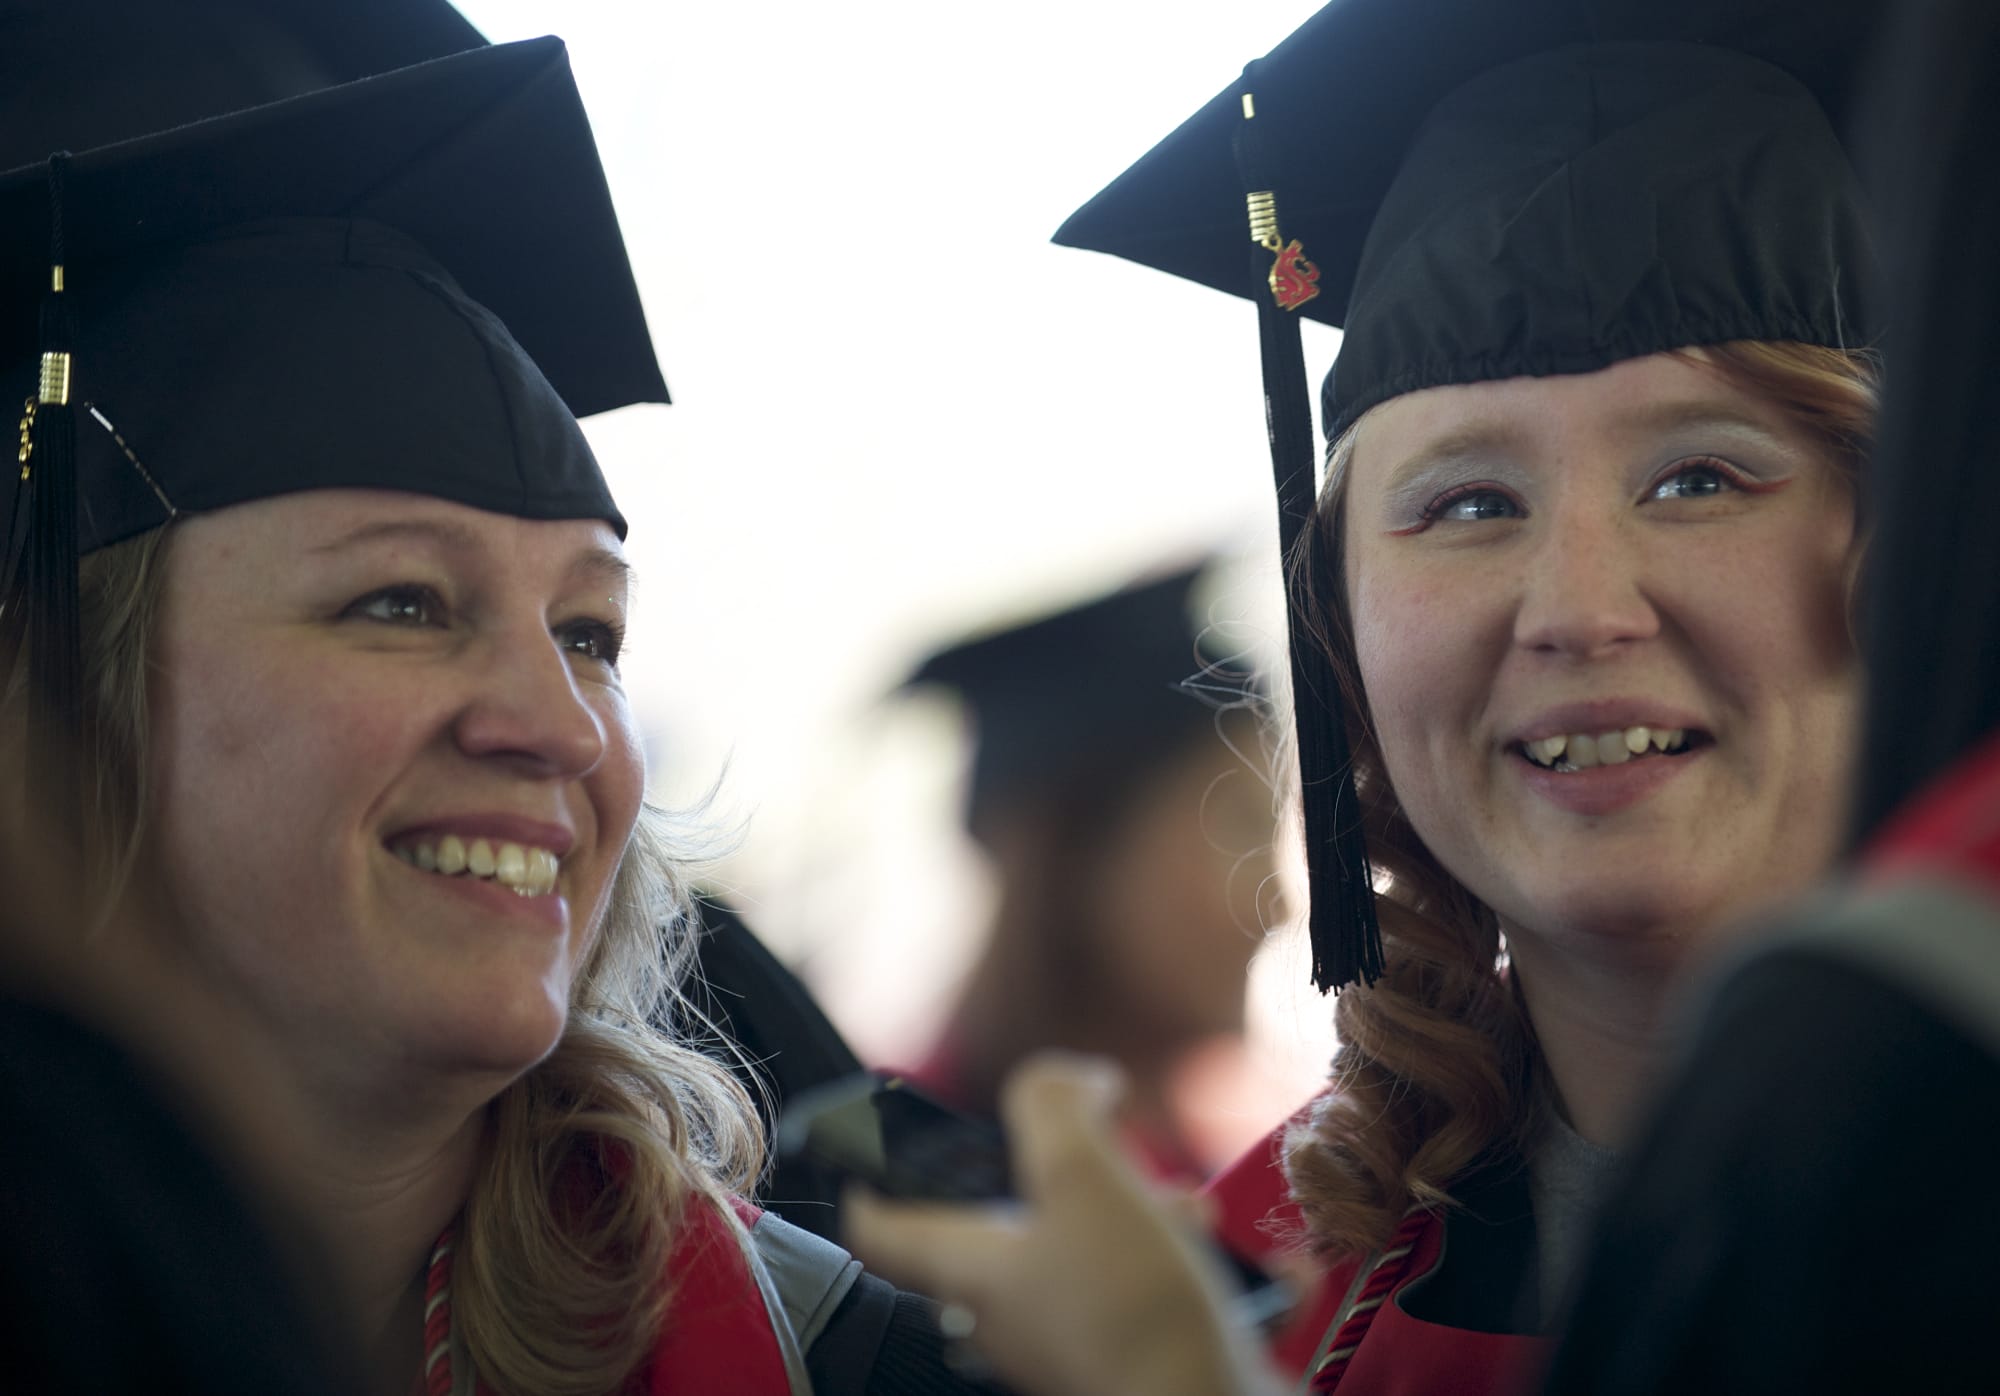 Cheryl Jones and her daughter Cori get ready to walk at Washington State University Vancouver's commencement ceremony Saturday at the Sleep Country Amphitheater.